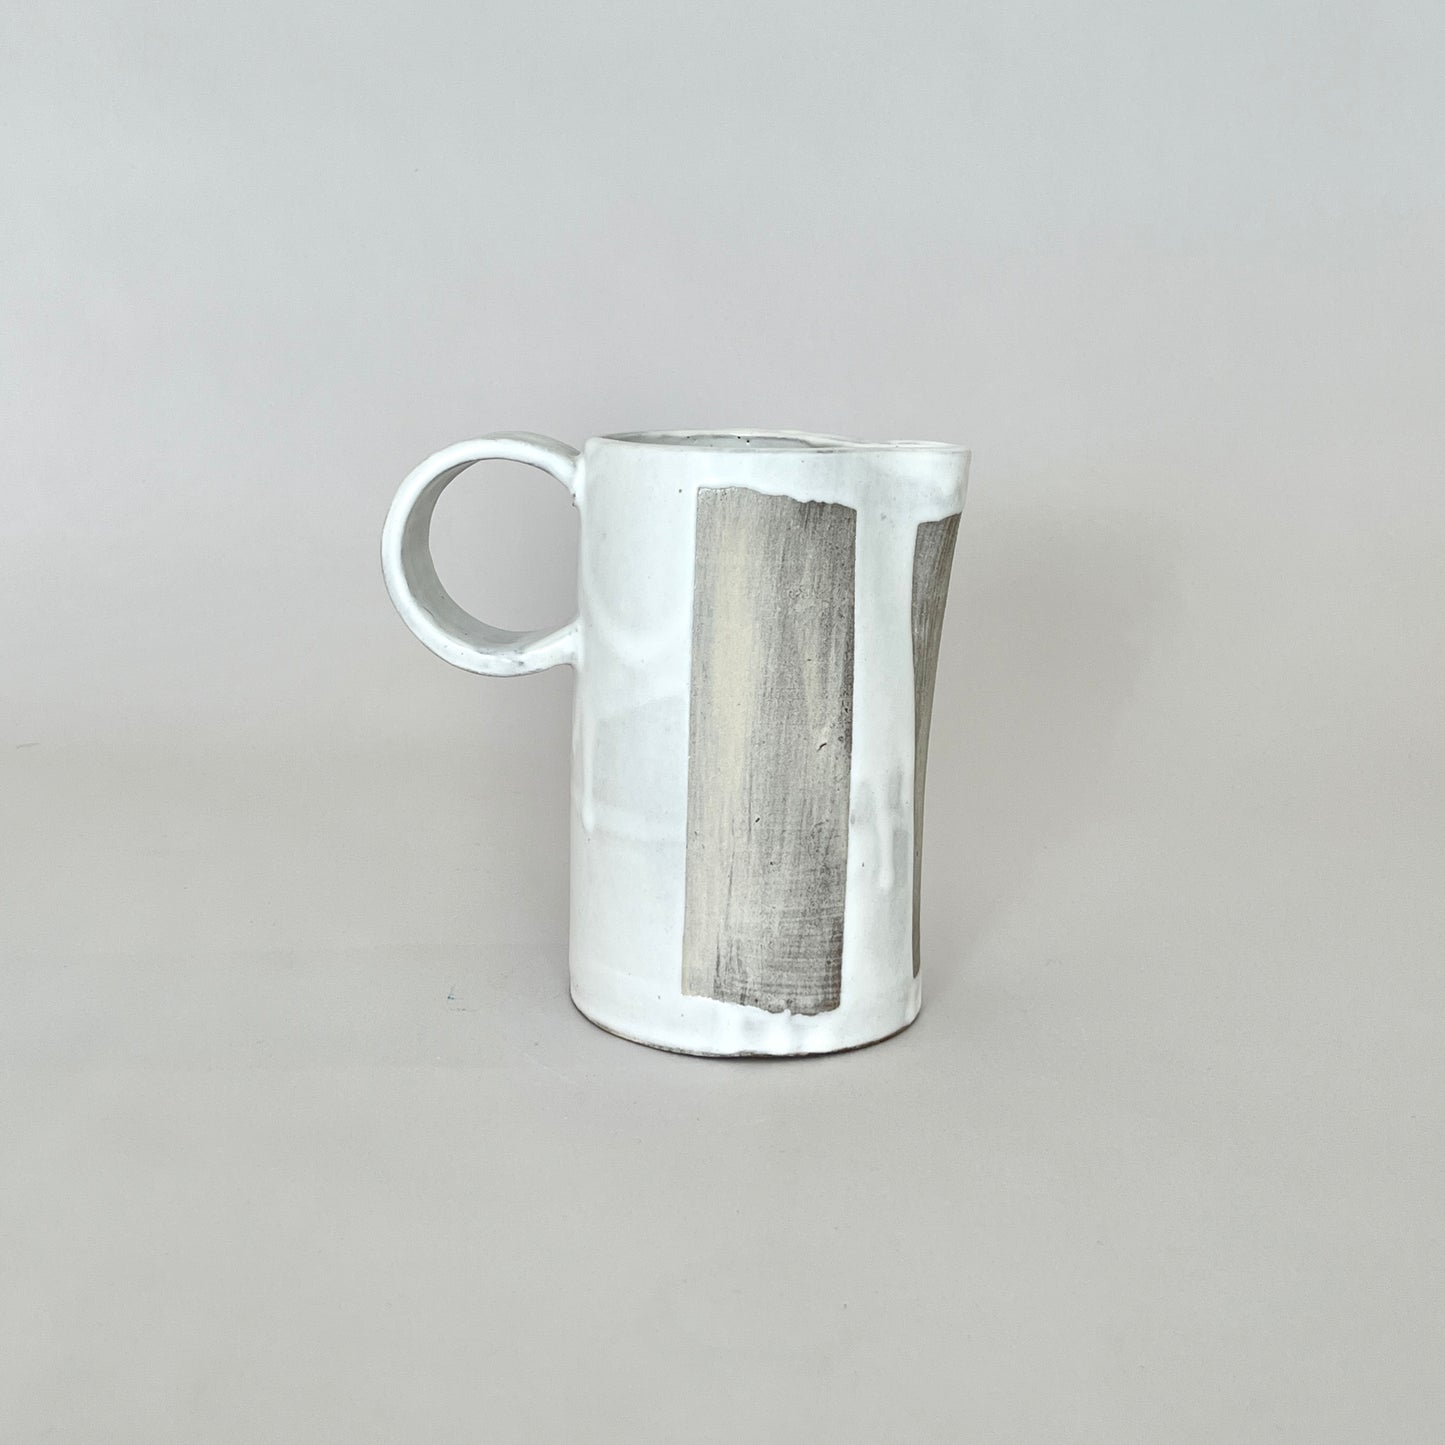 Painter Tape Pitcher, Small White No.1